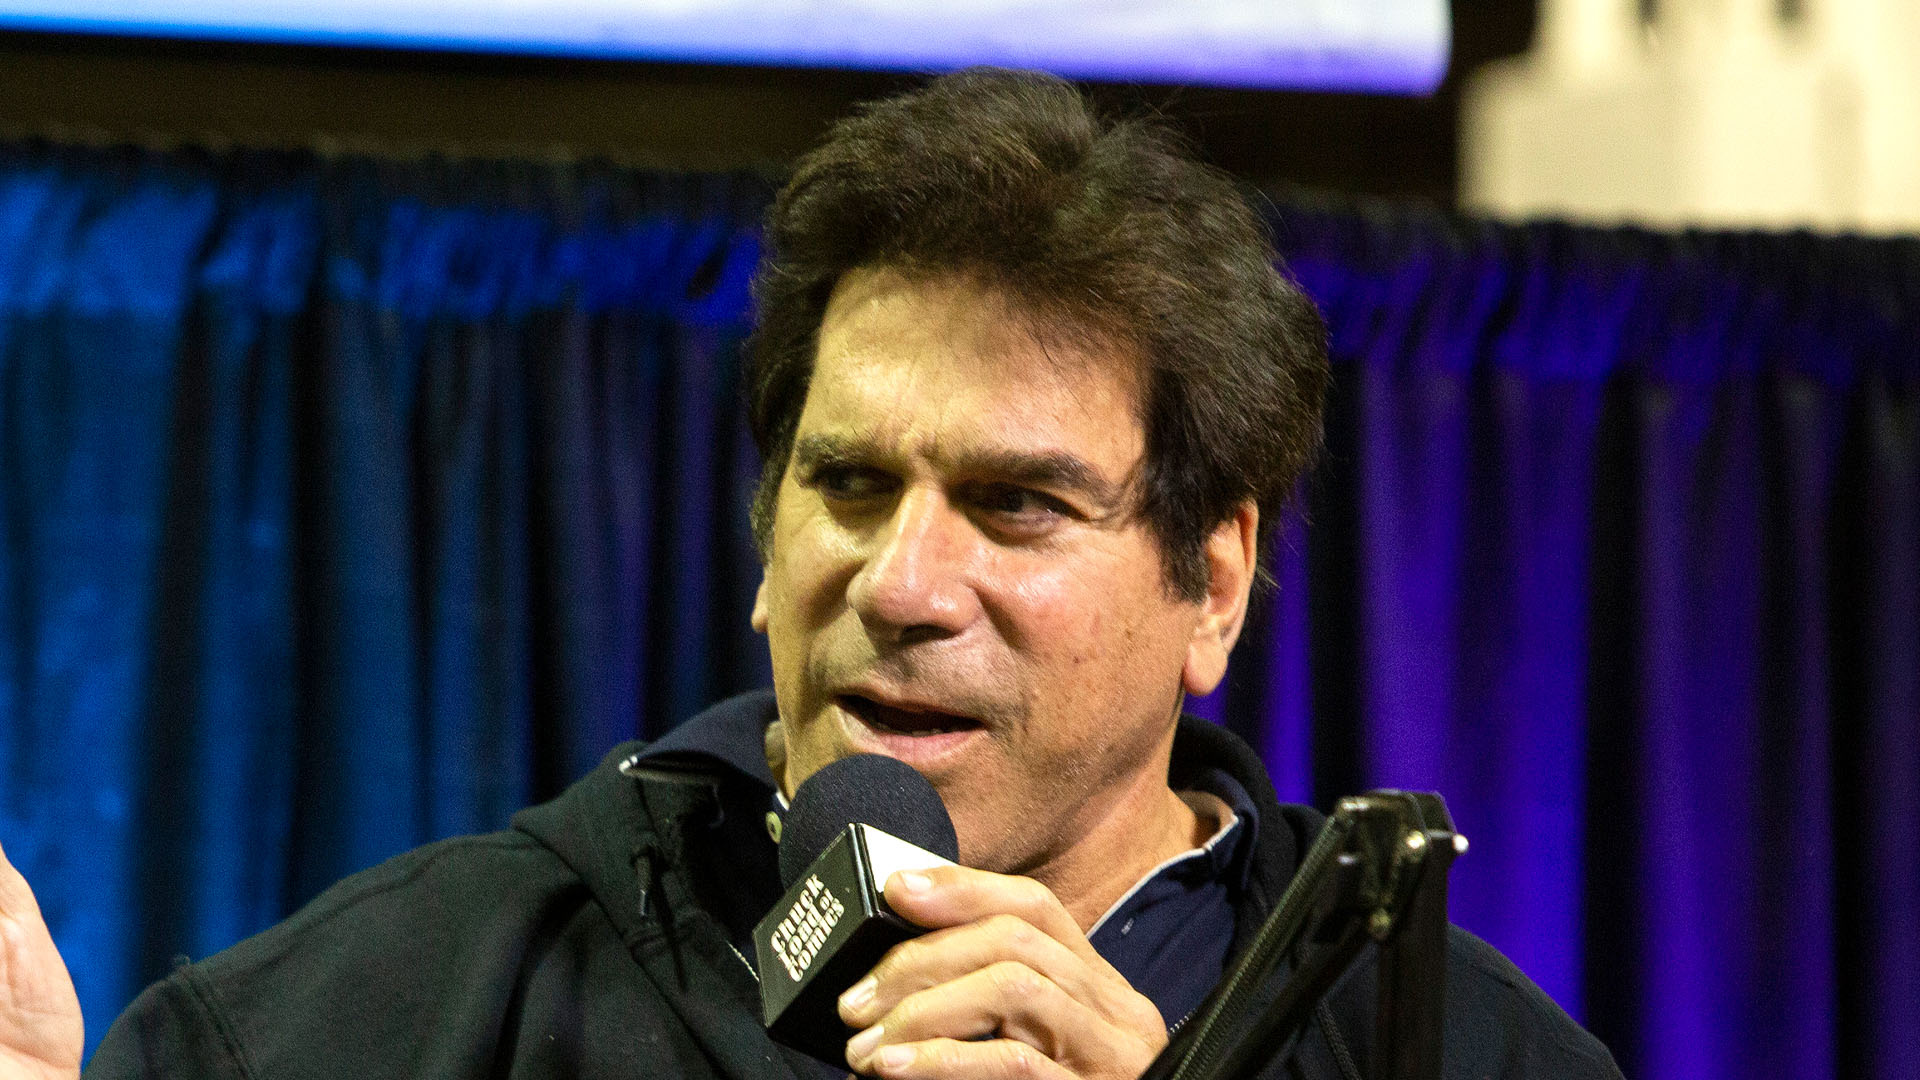 Incredible Hulk star Lou Ferrigno sues own daughter for ‘taking social media accounts’ – but wife accuses him of affair [Video]